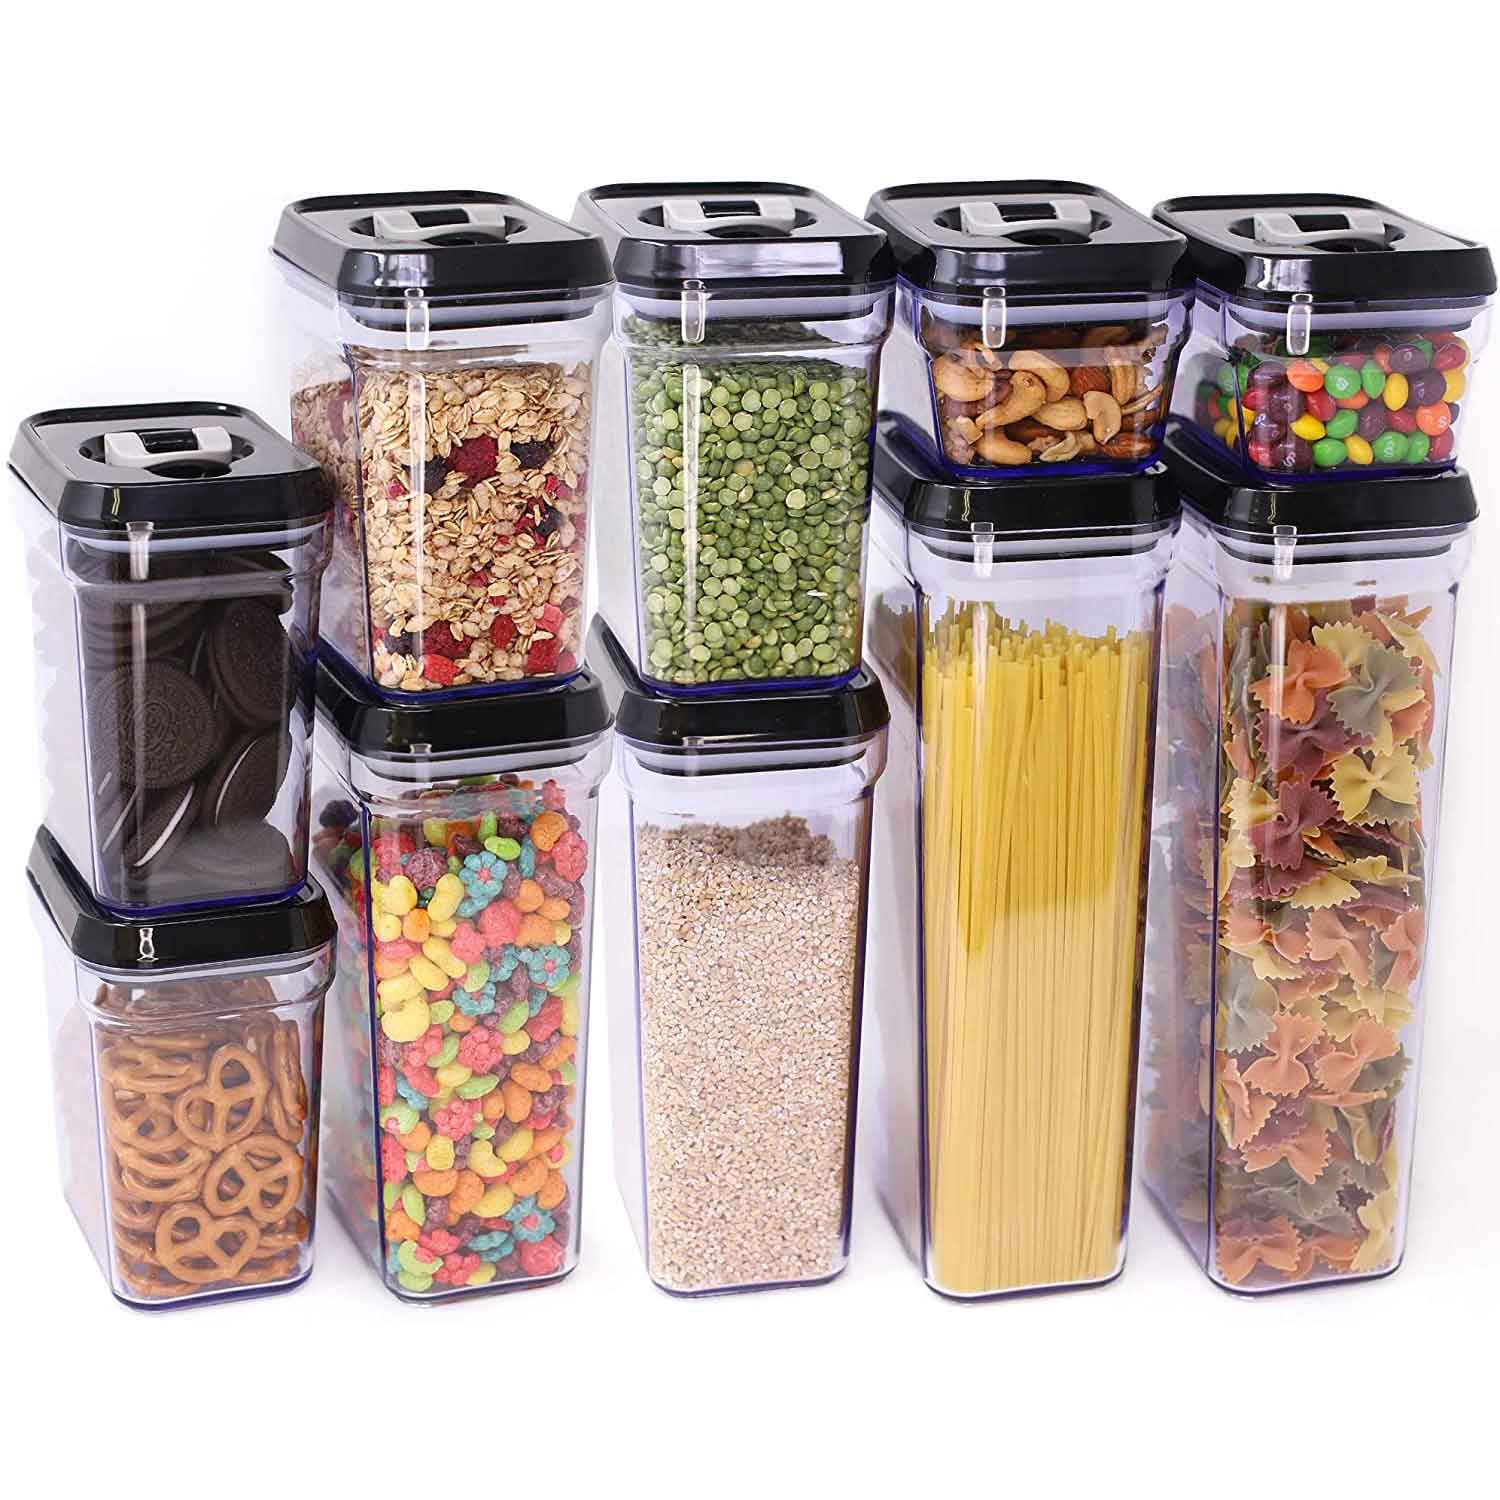 https://www.hungrypinner.com/wp-content/uploads/2021/02/zeppoli-air-tight-food-storage-container-set.jpg